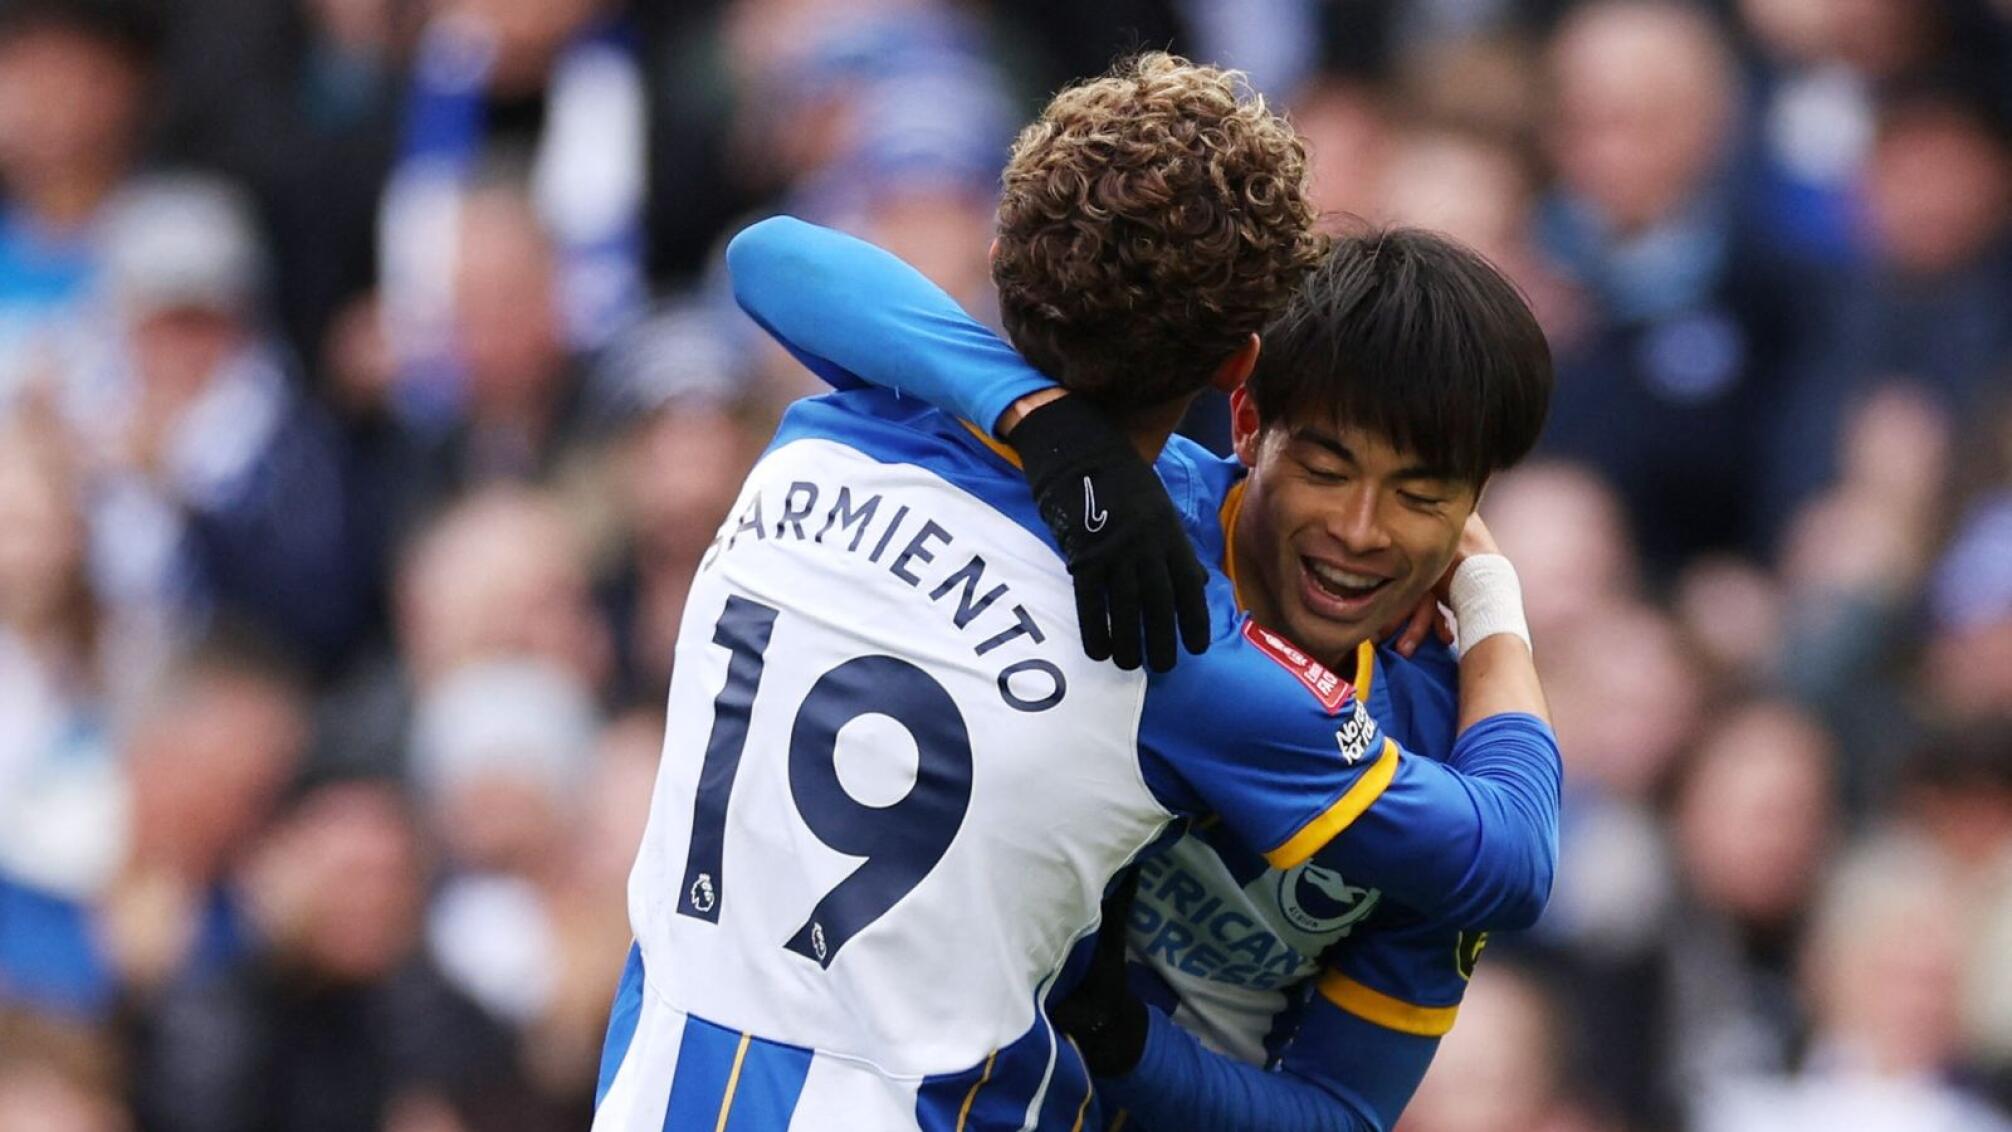 Brighton & Hove Albion's Kaoru Mitoma celebrates with Jeremy Sarmiento after scoring their fifth goal in their FA Cup quarter-final clash against Grimsby at the American Express Community Stadium in Brighton on Sunday